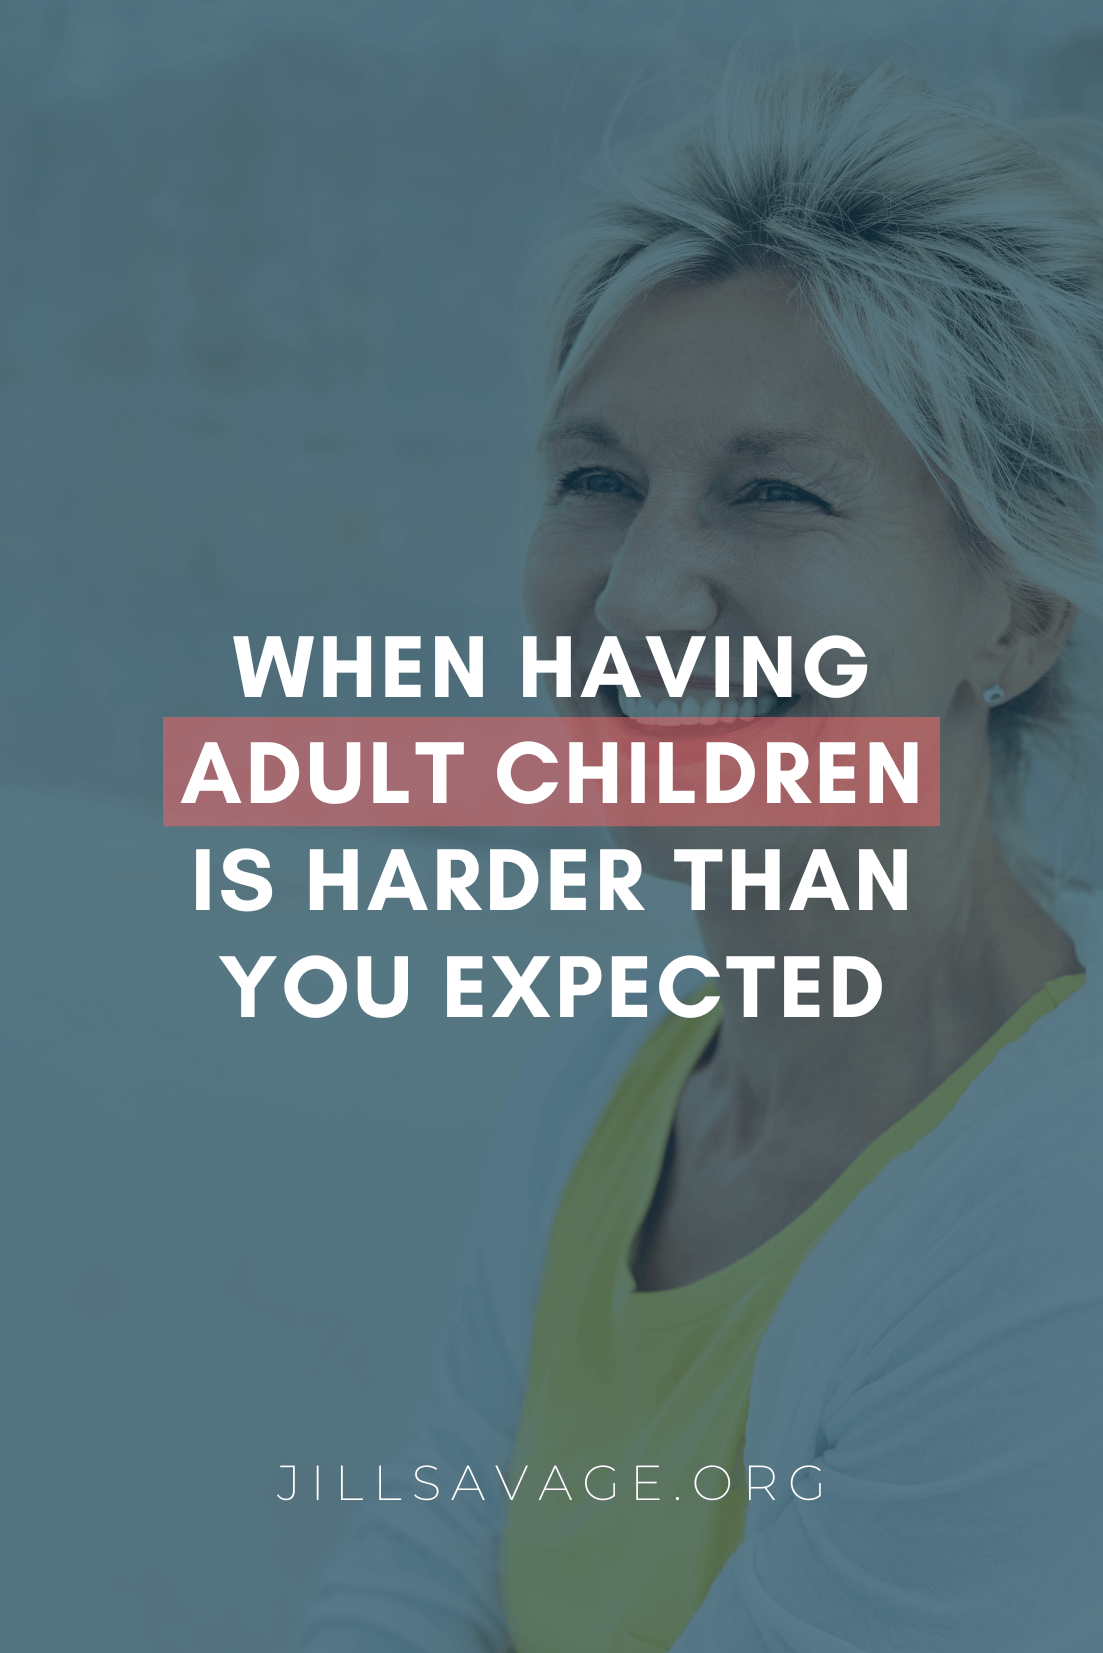 When Having Adult Children is Harder Than You Expected